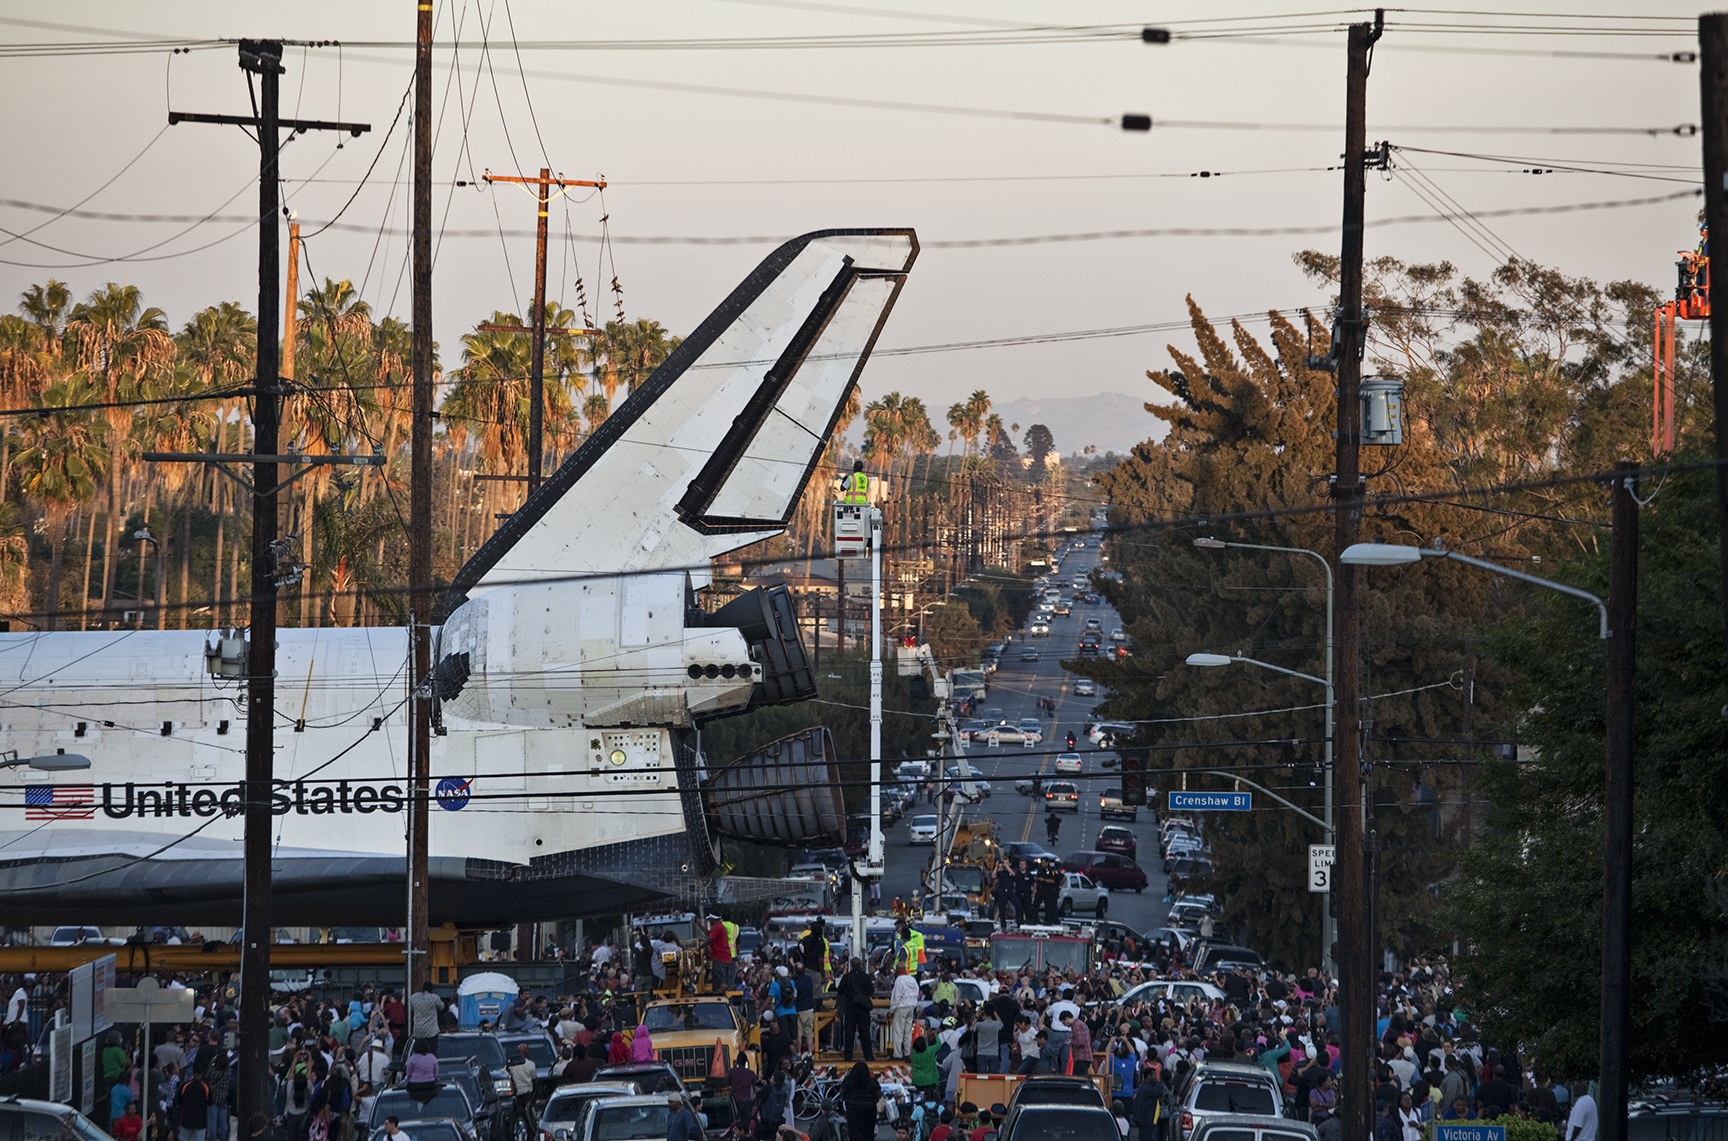  Space shuttle Endeavour makes its way through a Los Angeles neighborhood during a 12-mile land journey from the Los Angeles International Airport to the California Science Center, which is now its home.&nbsp; 